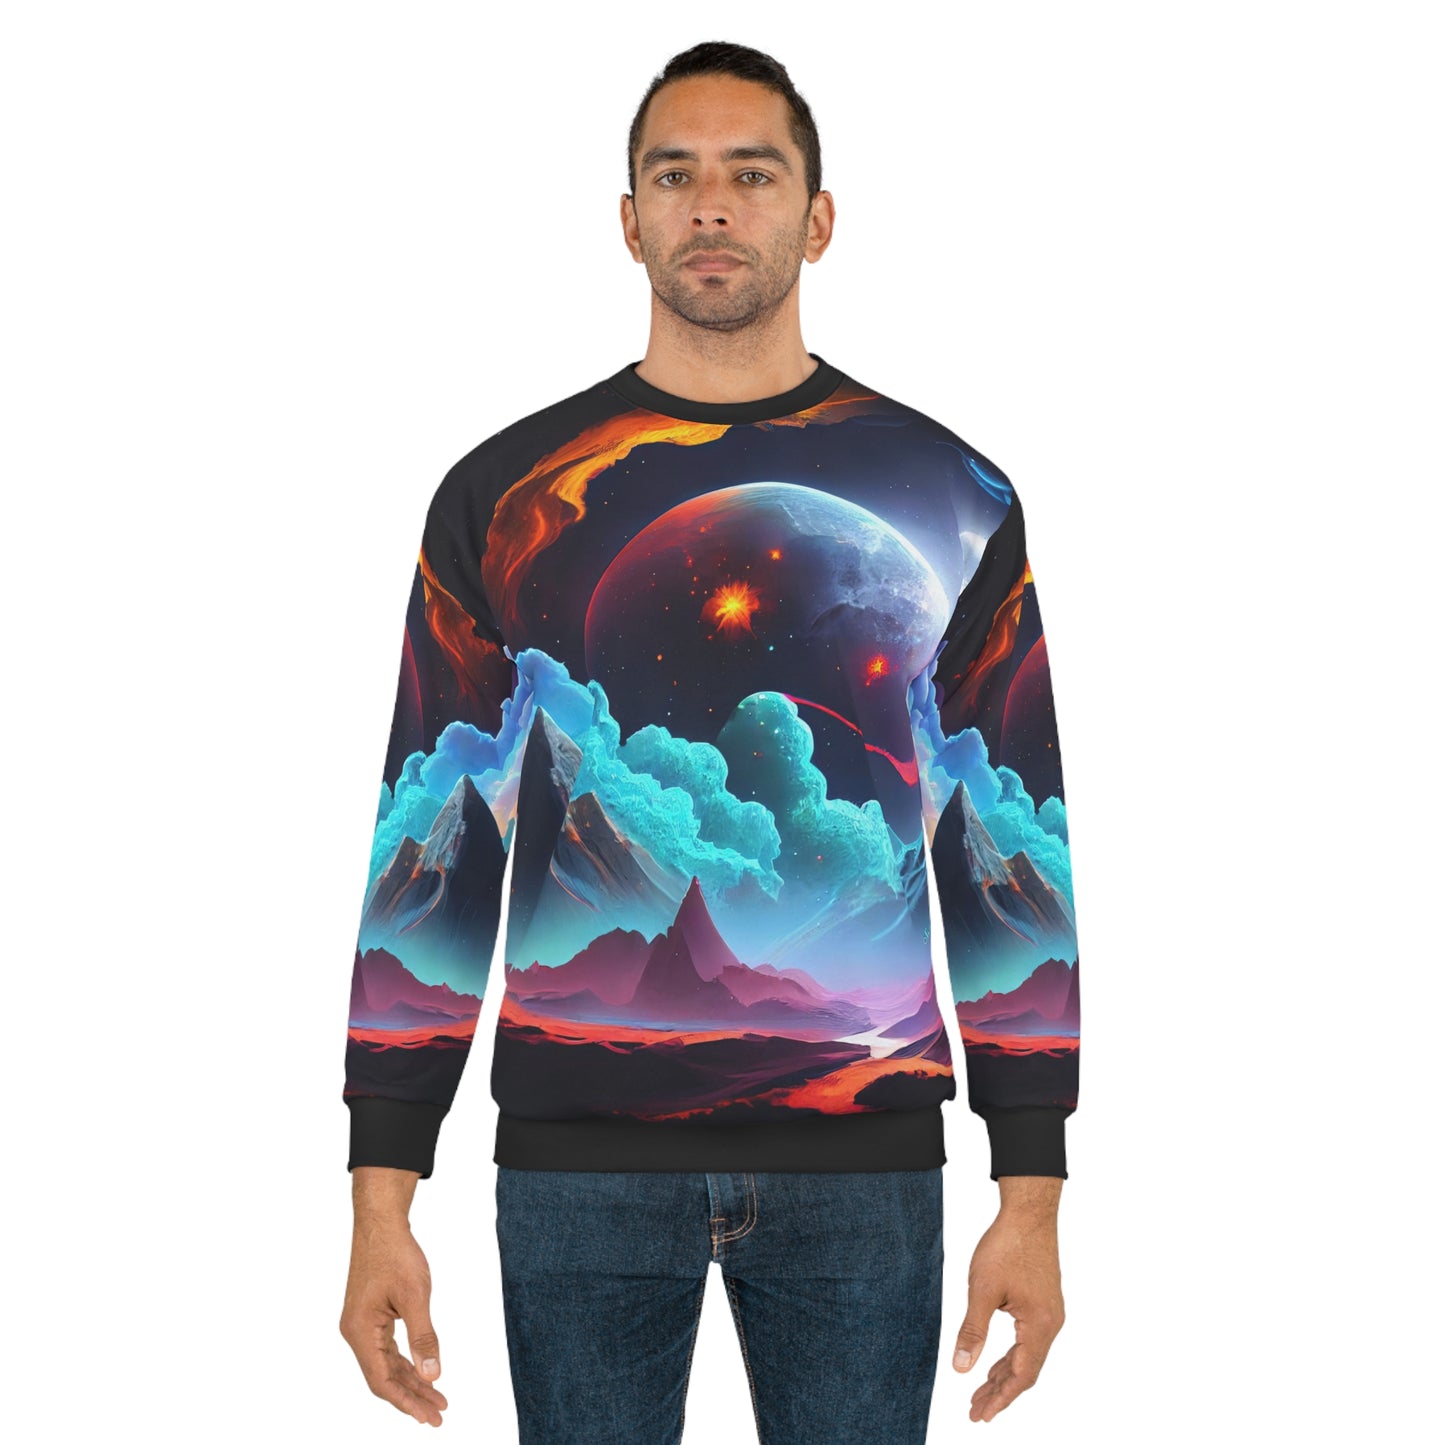 Outerspace - Sweatshirts For You